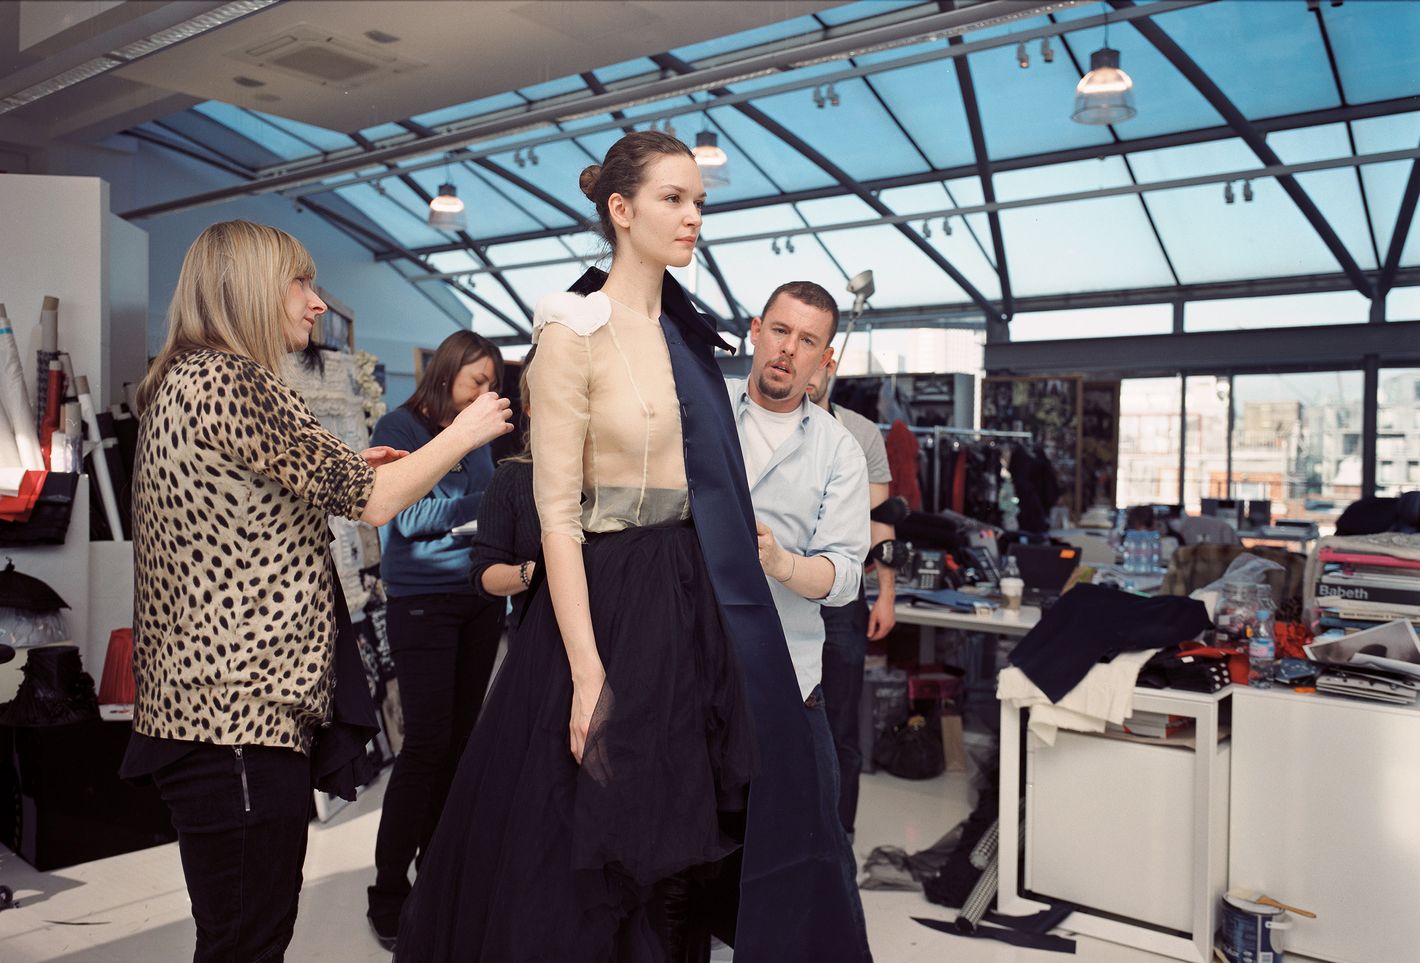 How to get a behind-the-scenes look at the new McQueen collection